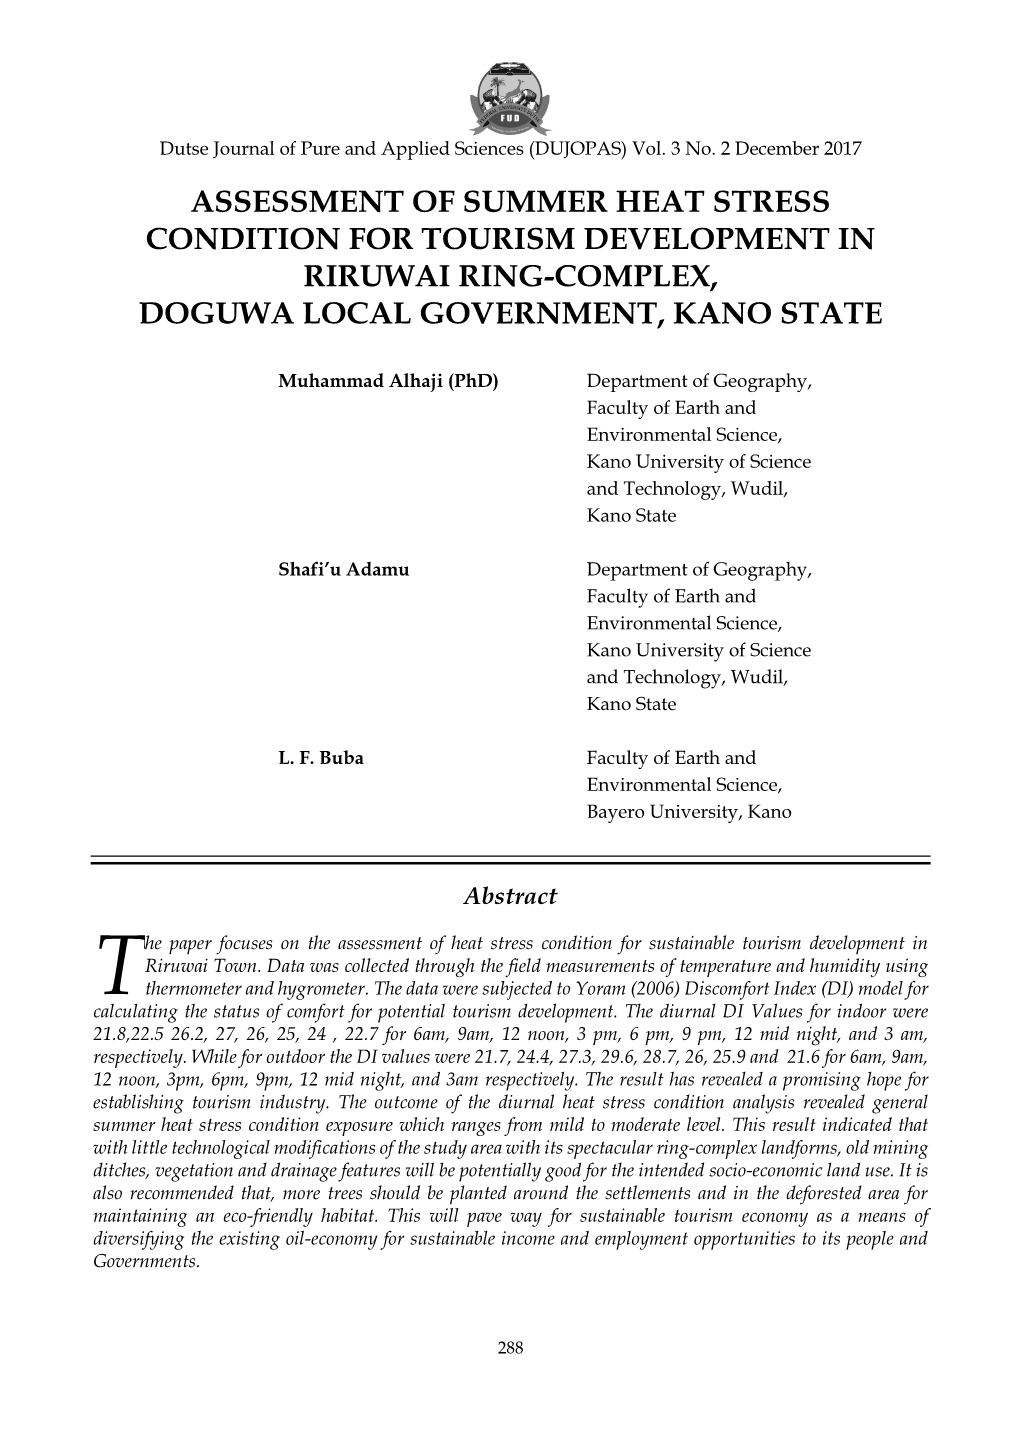 Assessment of Summer Heat Stress Condition for Tourism Development in Riruwai Ring-Complex, Doguwa Local Government, Kano State